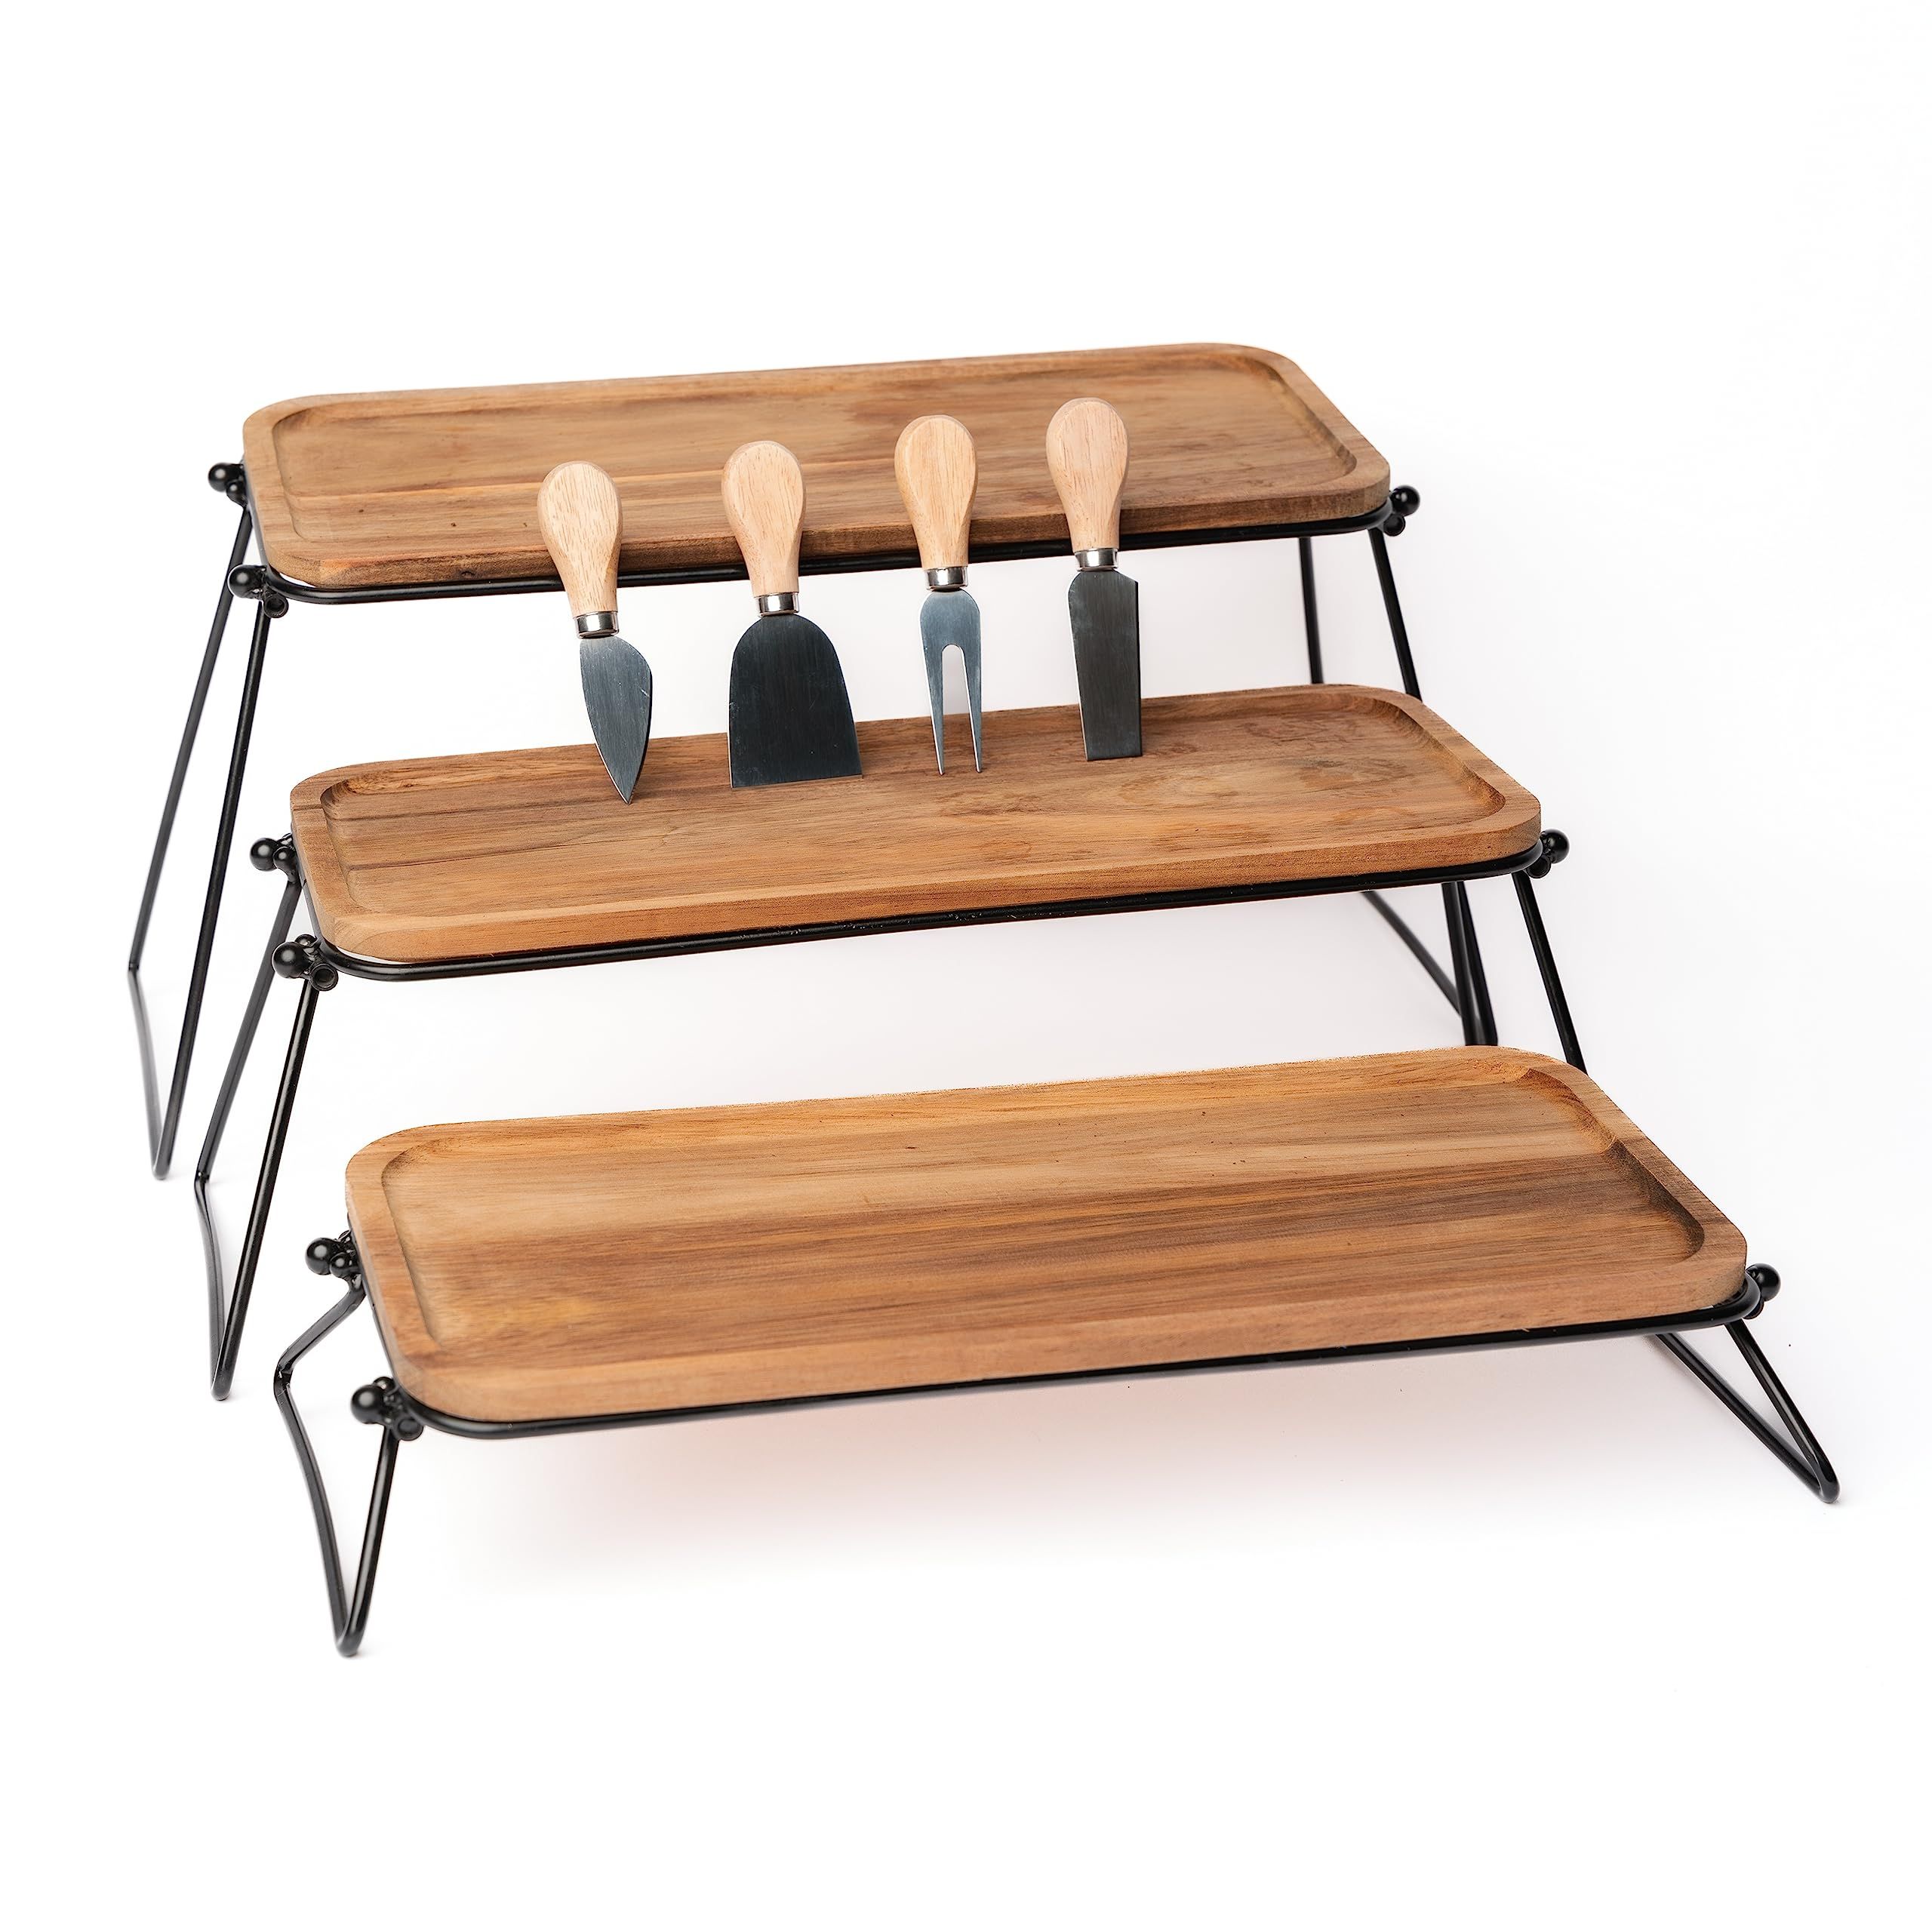 tb Gonzo's 3 tier multipurpose wooden serving trays with serving accessories | Amazon (US)